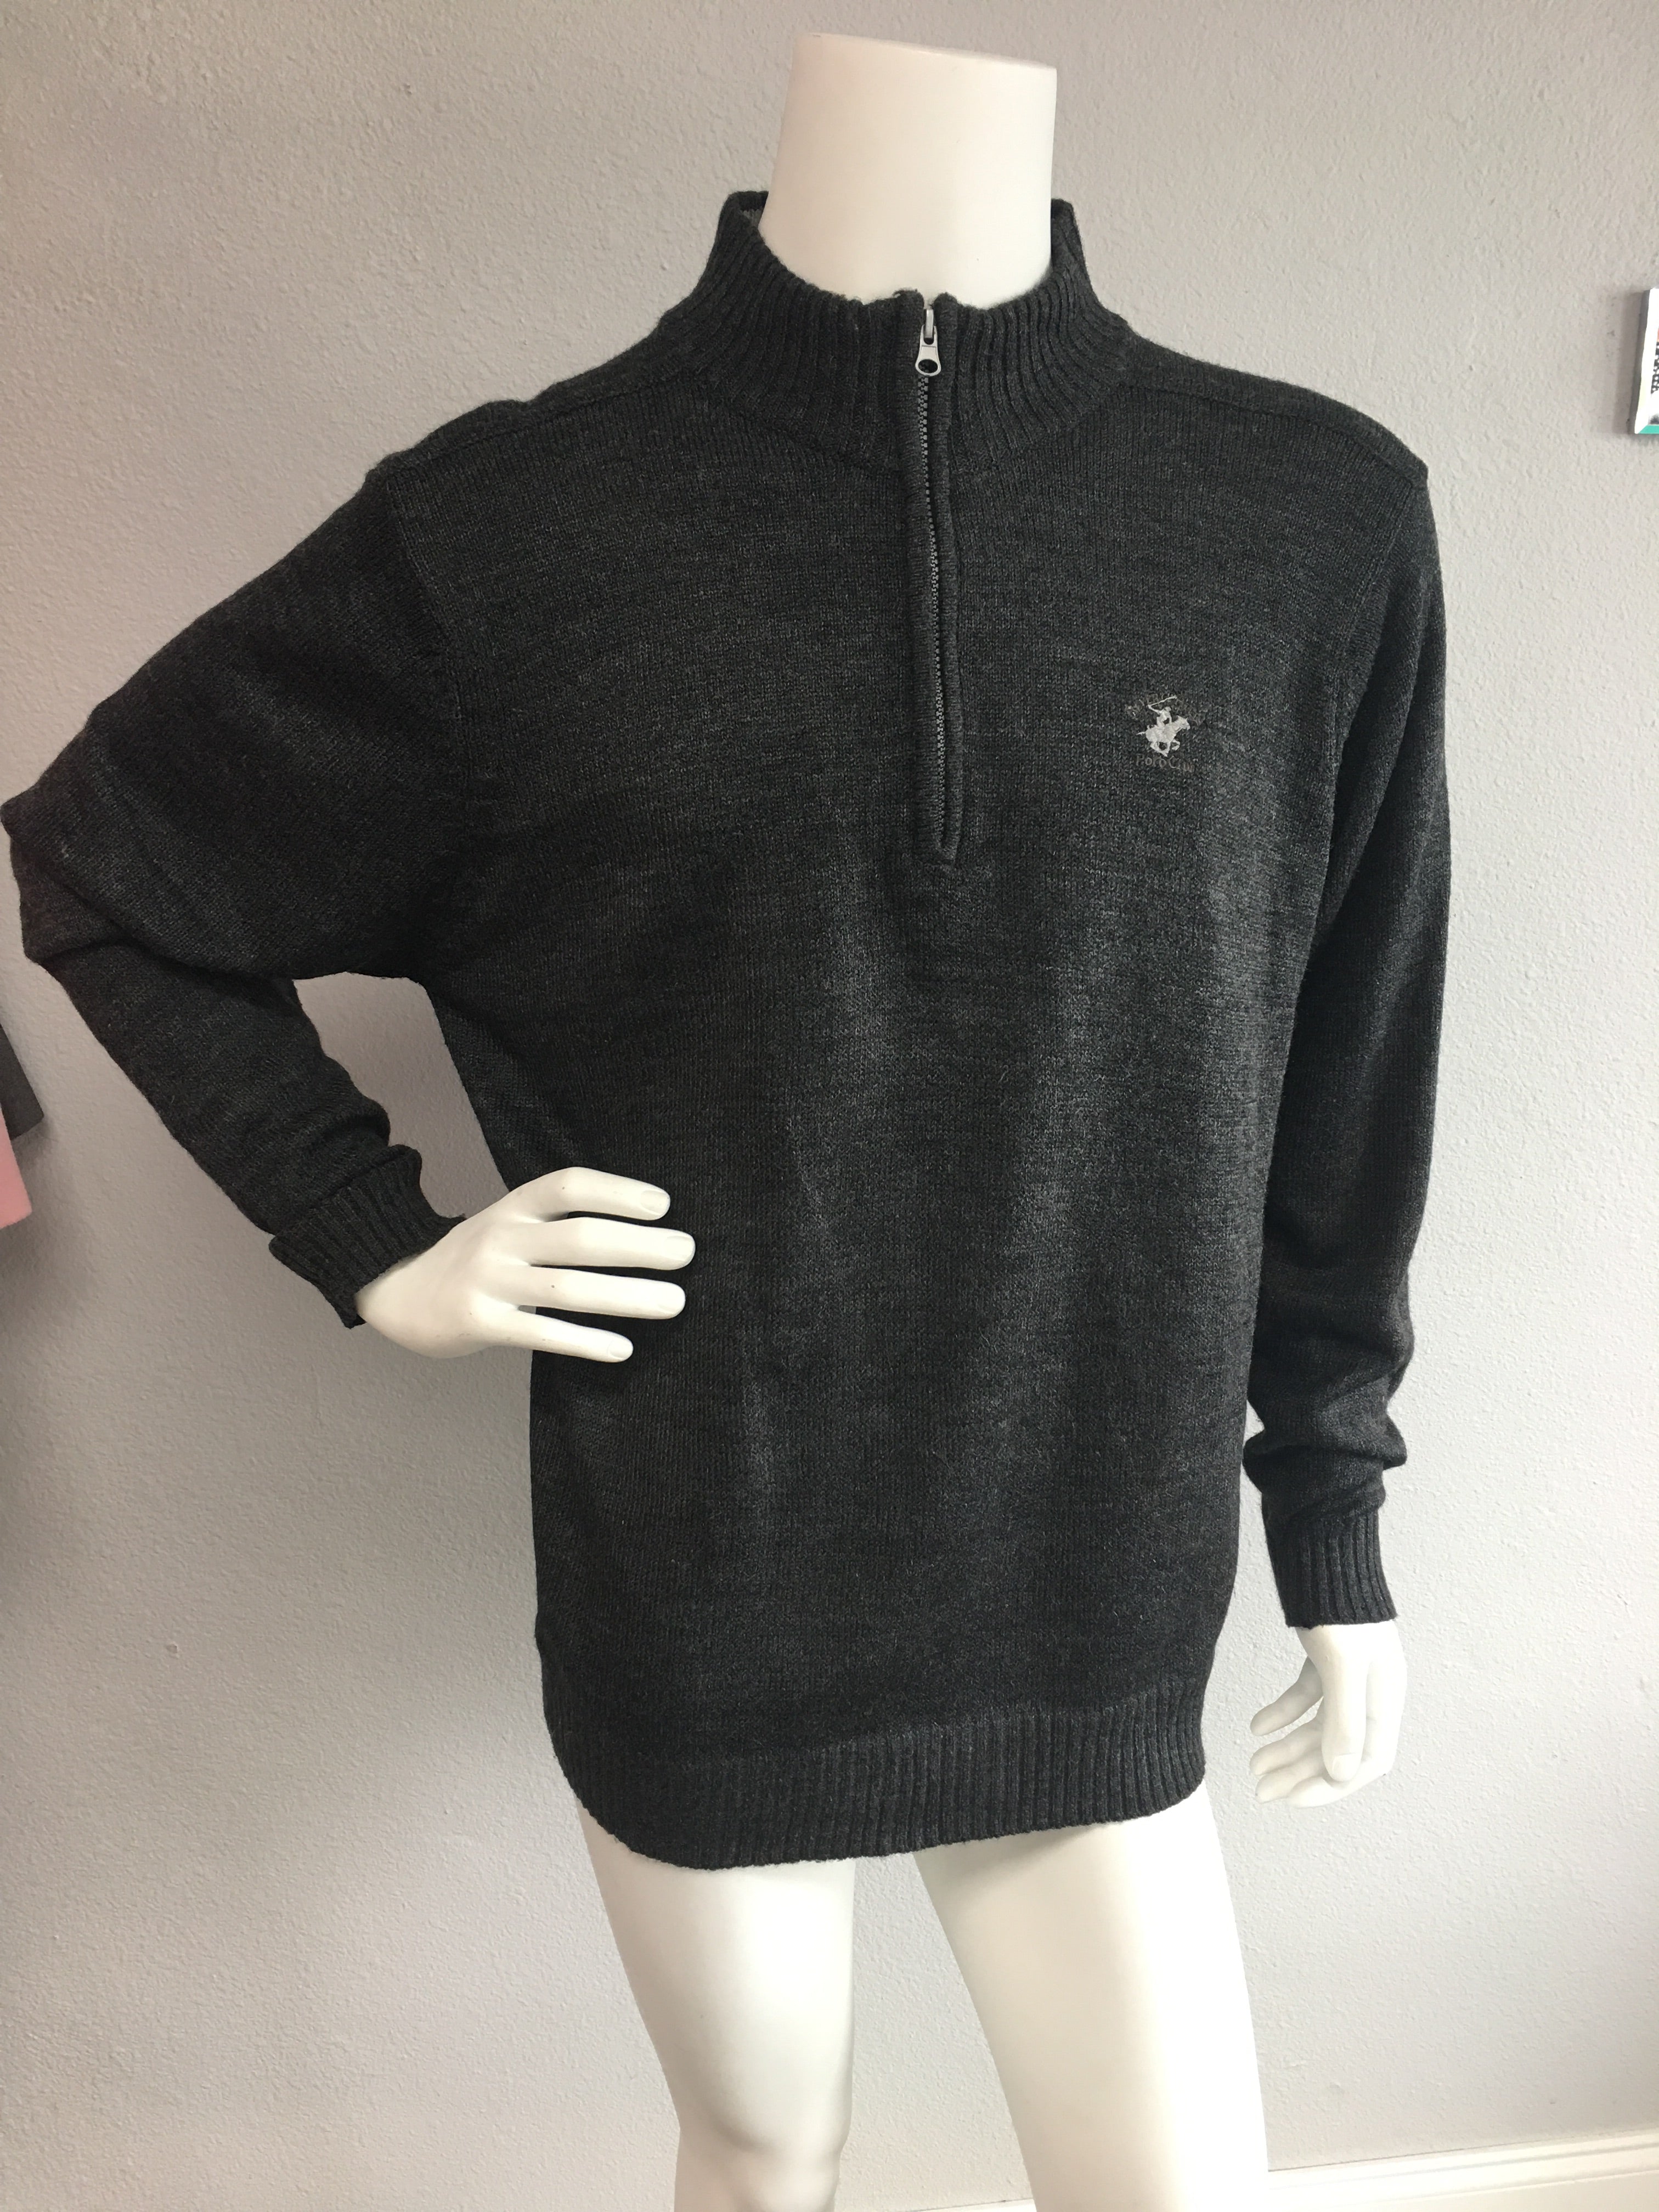 Beverly Hills Polo Club Sweater - Vanity's Vault